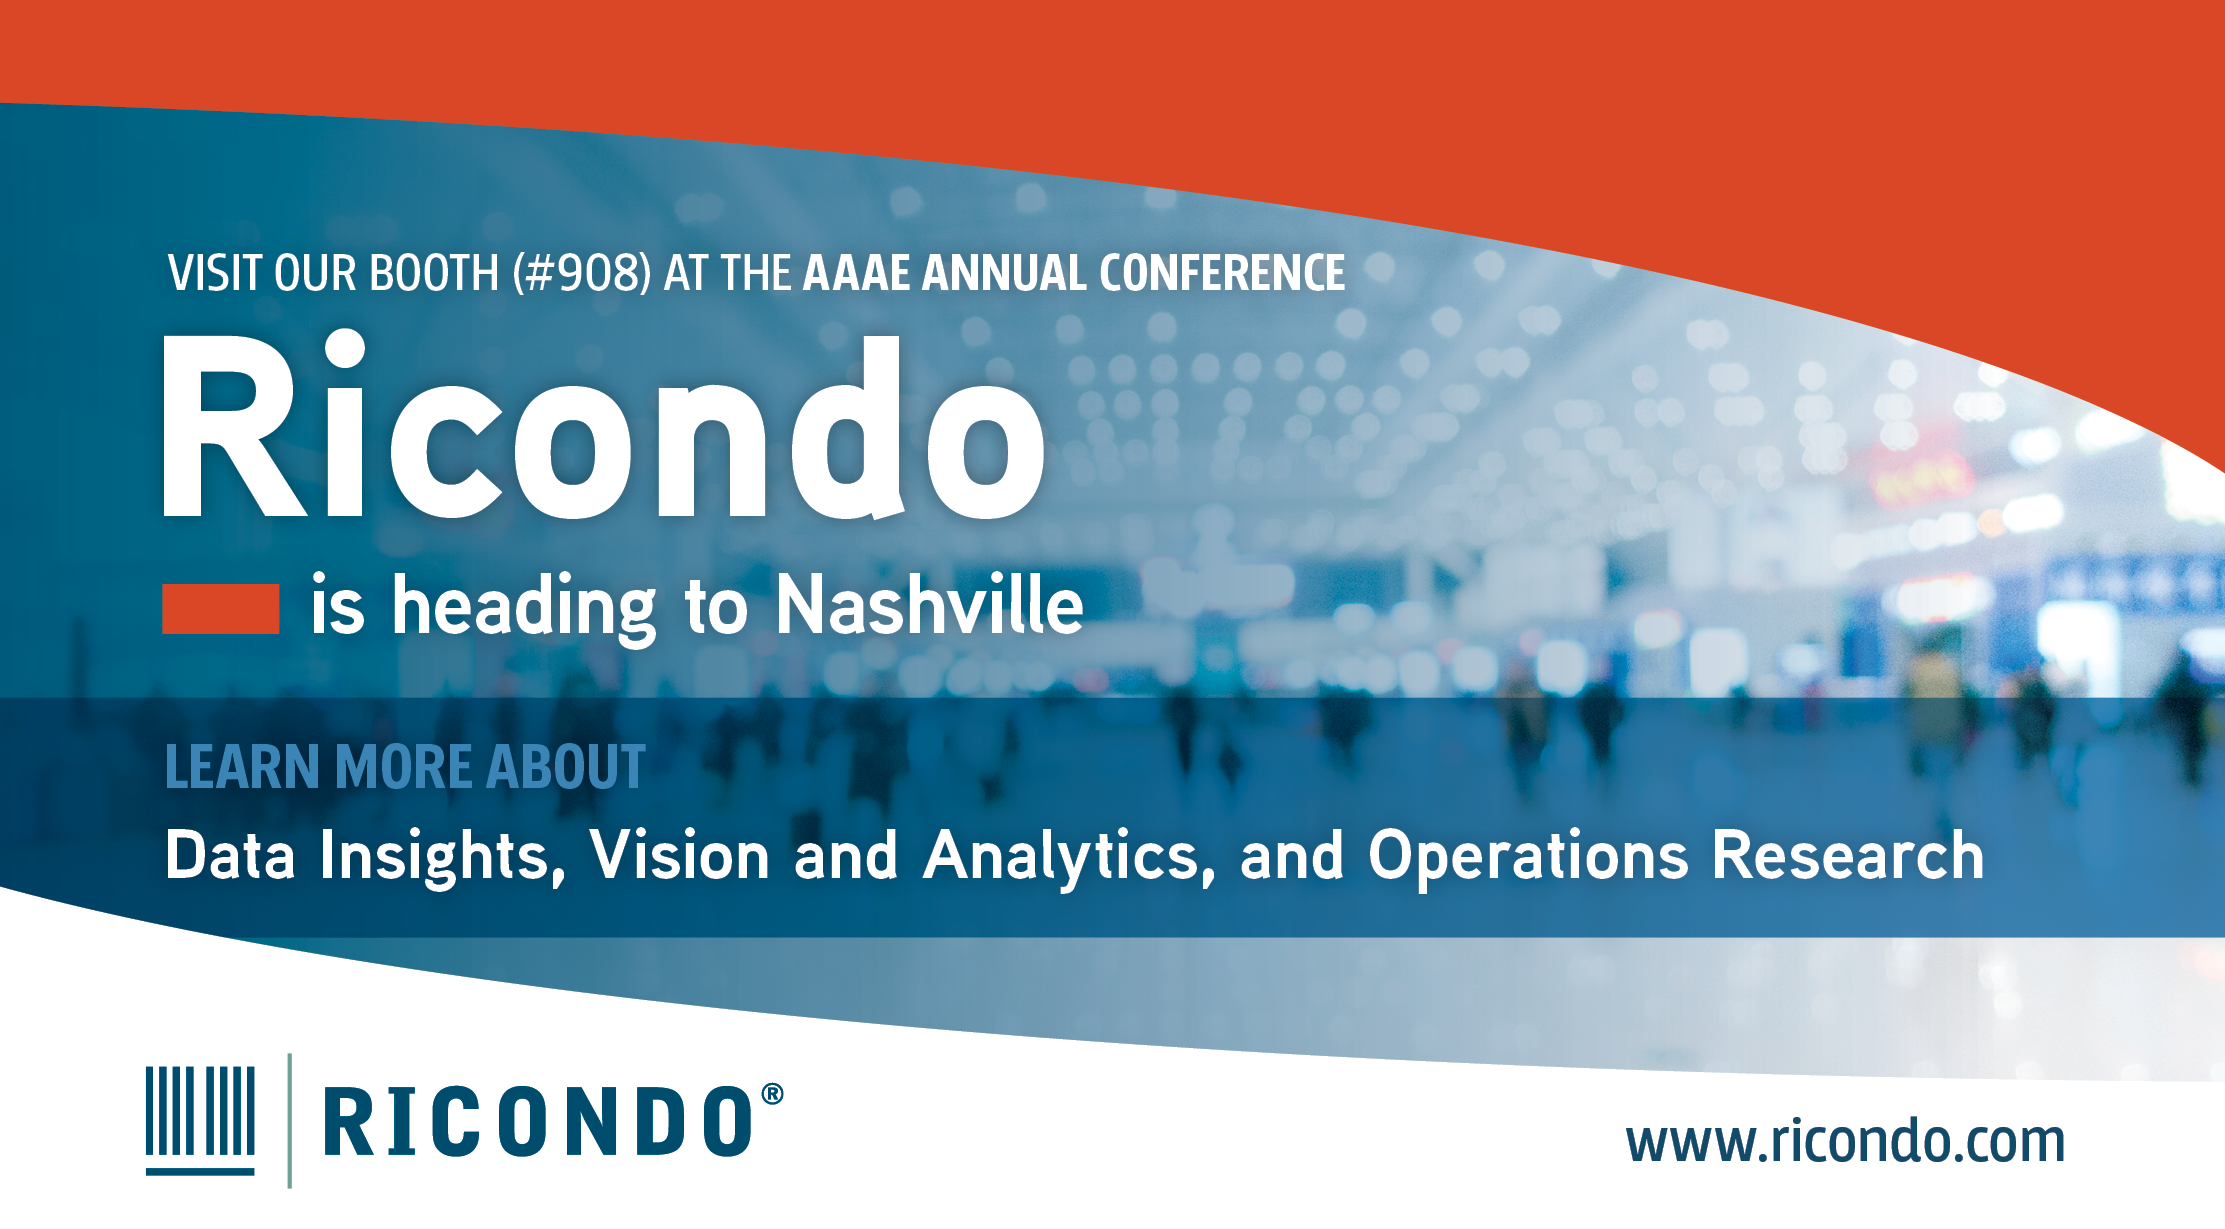 Visit Our booth (#908) at the AAAE Annual Conference | Ricondo is heading to Nashville | Learn more about data insights, vision and analytics, and operations research | www.ricondo.com